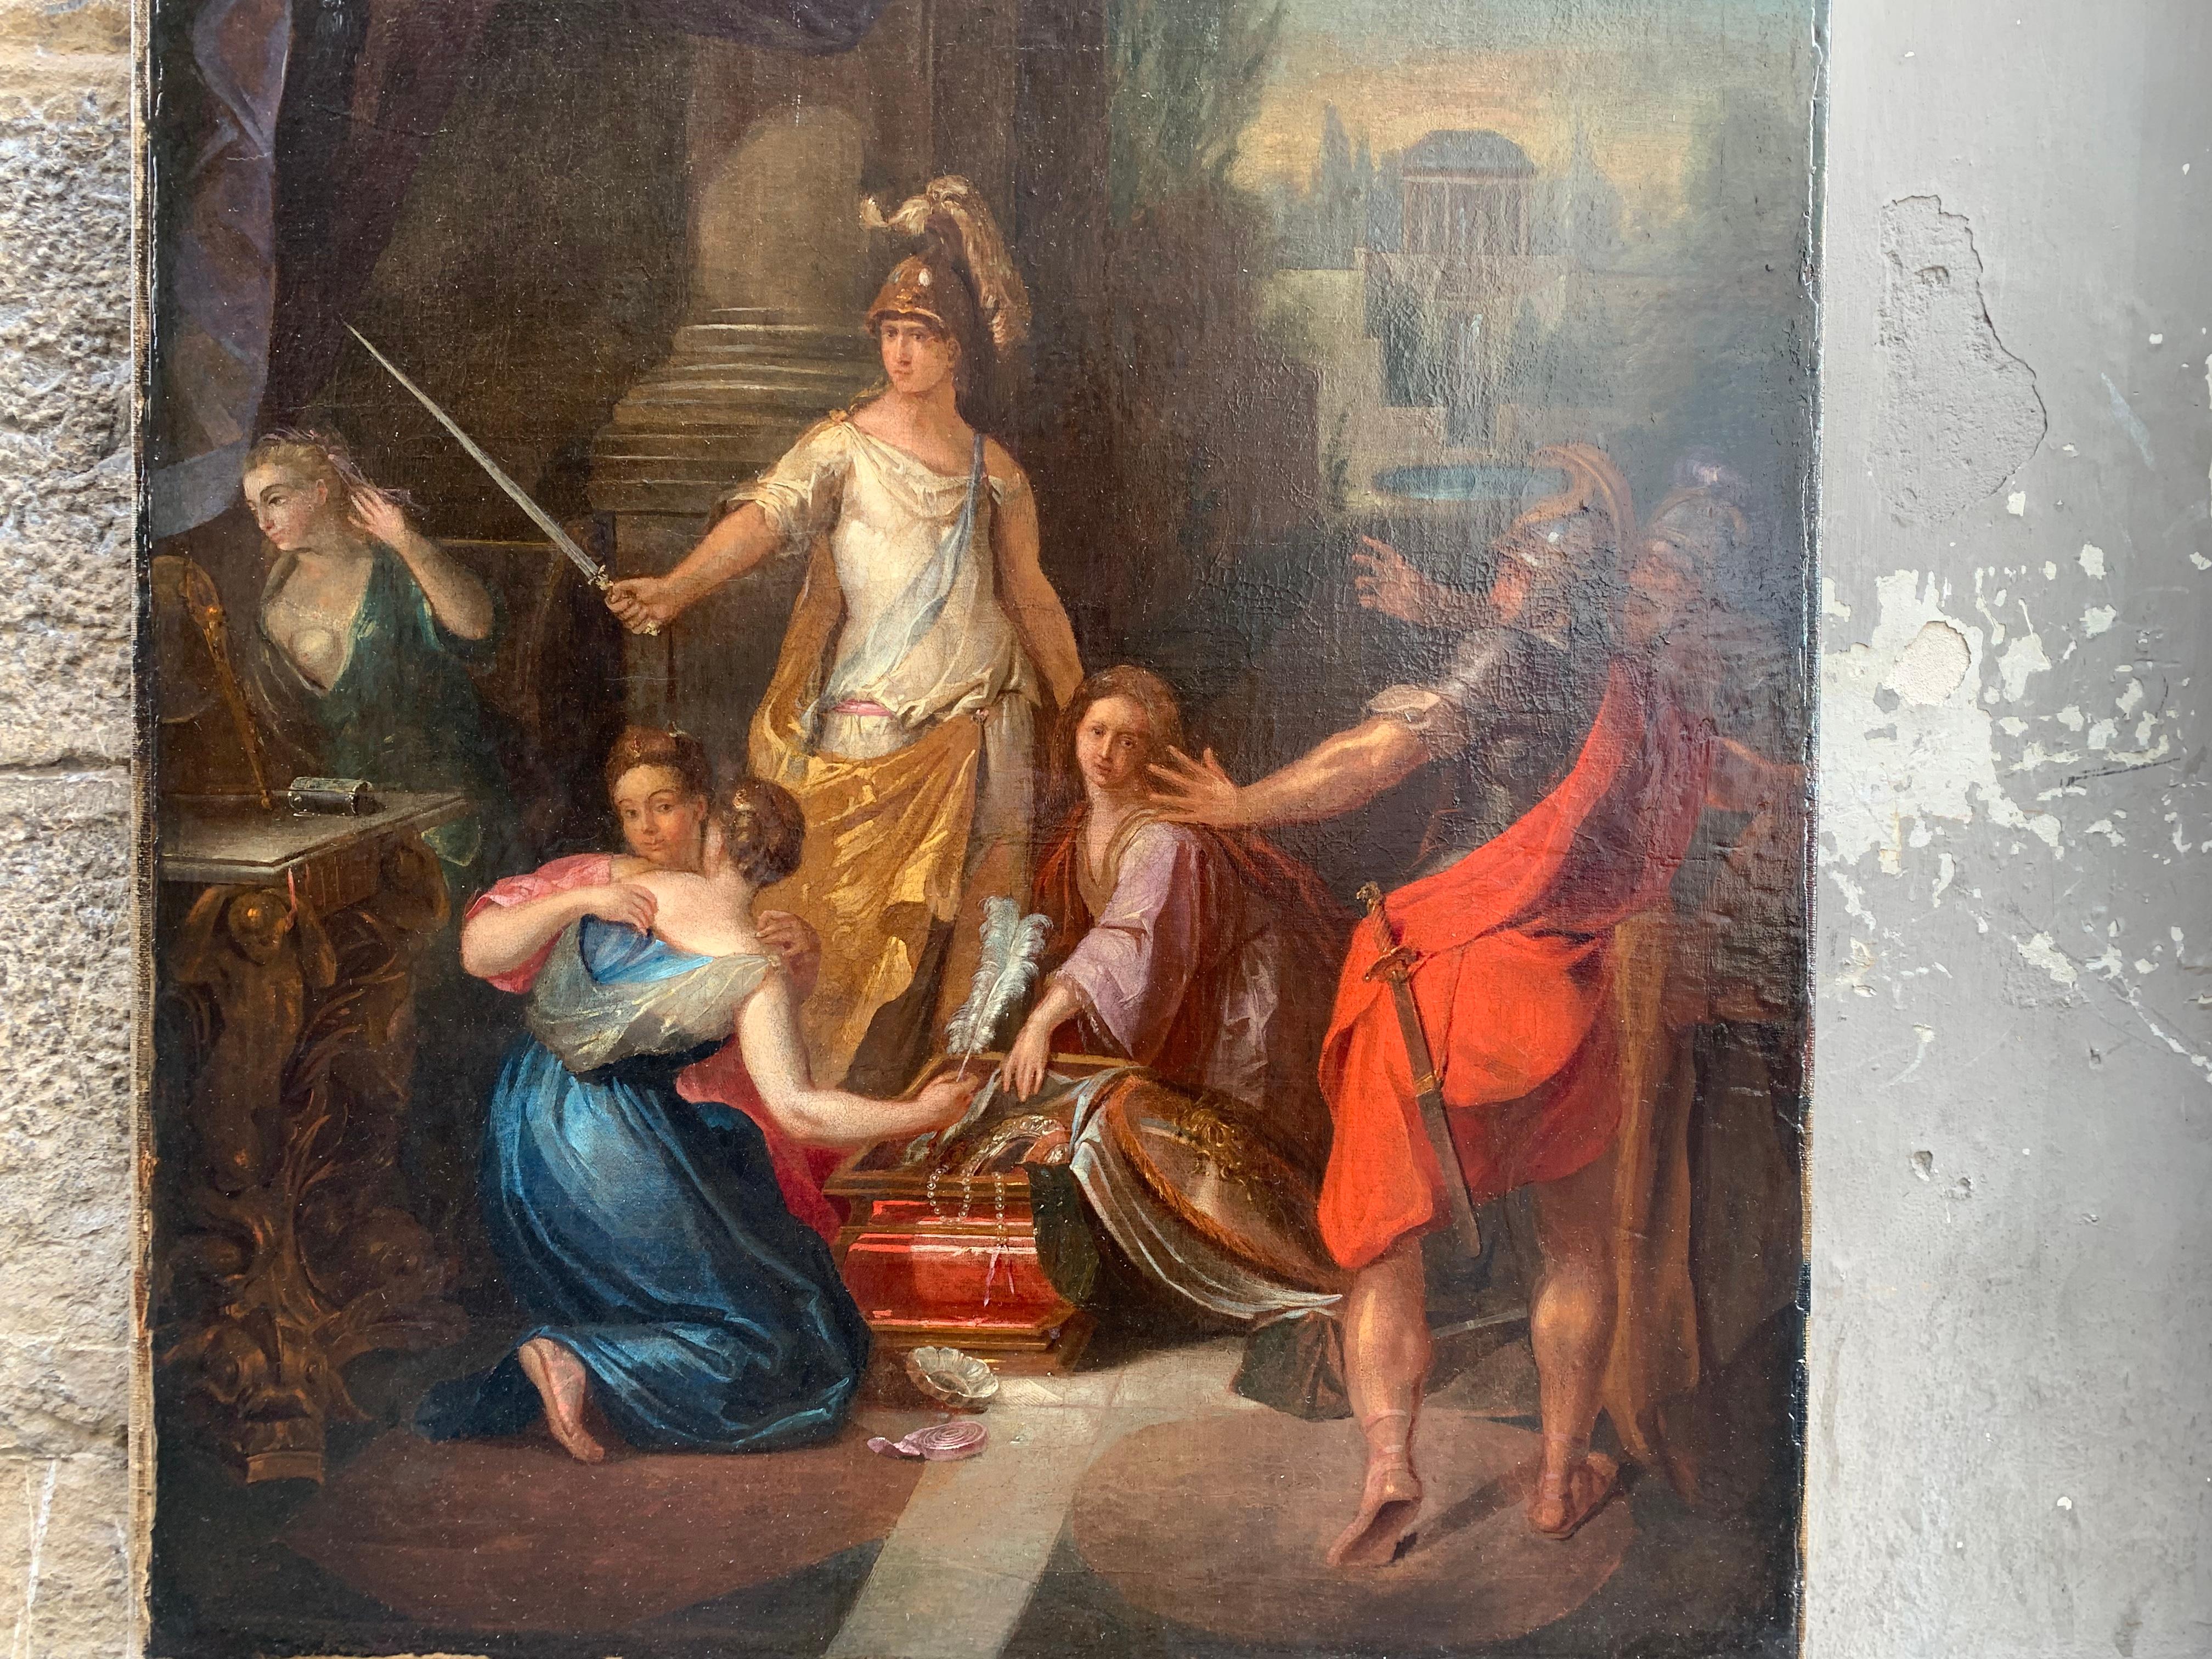 Achilles in the guise of a woman discovered by Ulysses. Dutch school, circa 1720 7